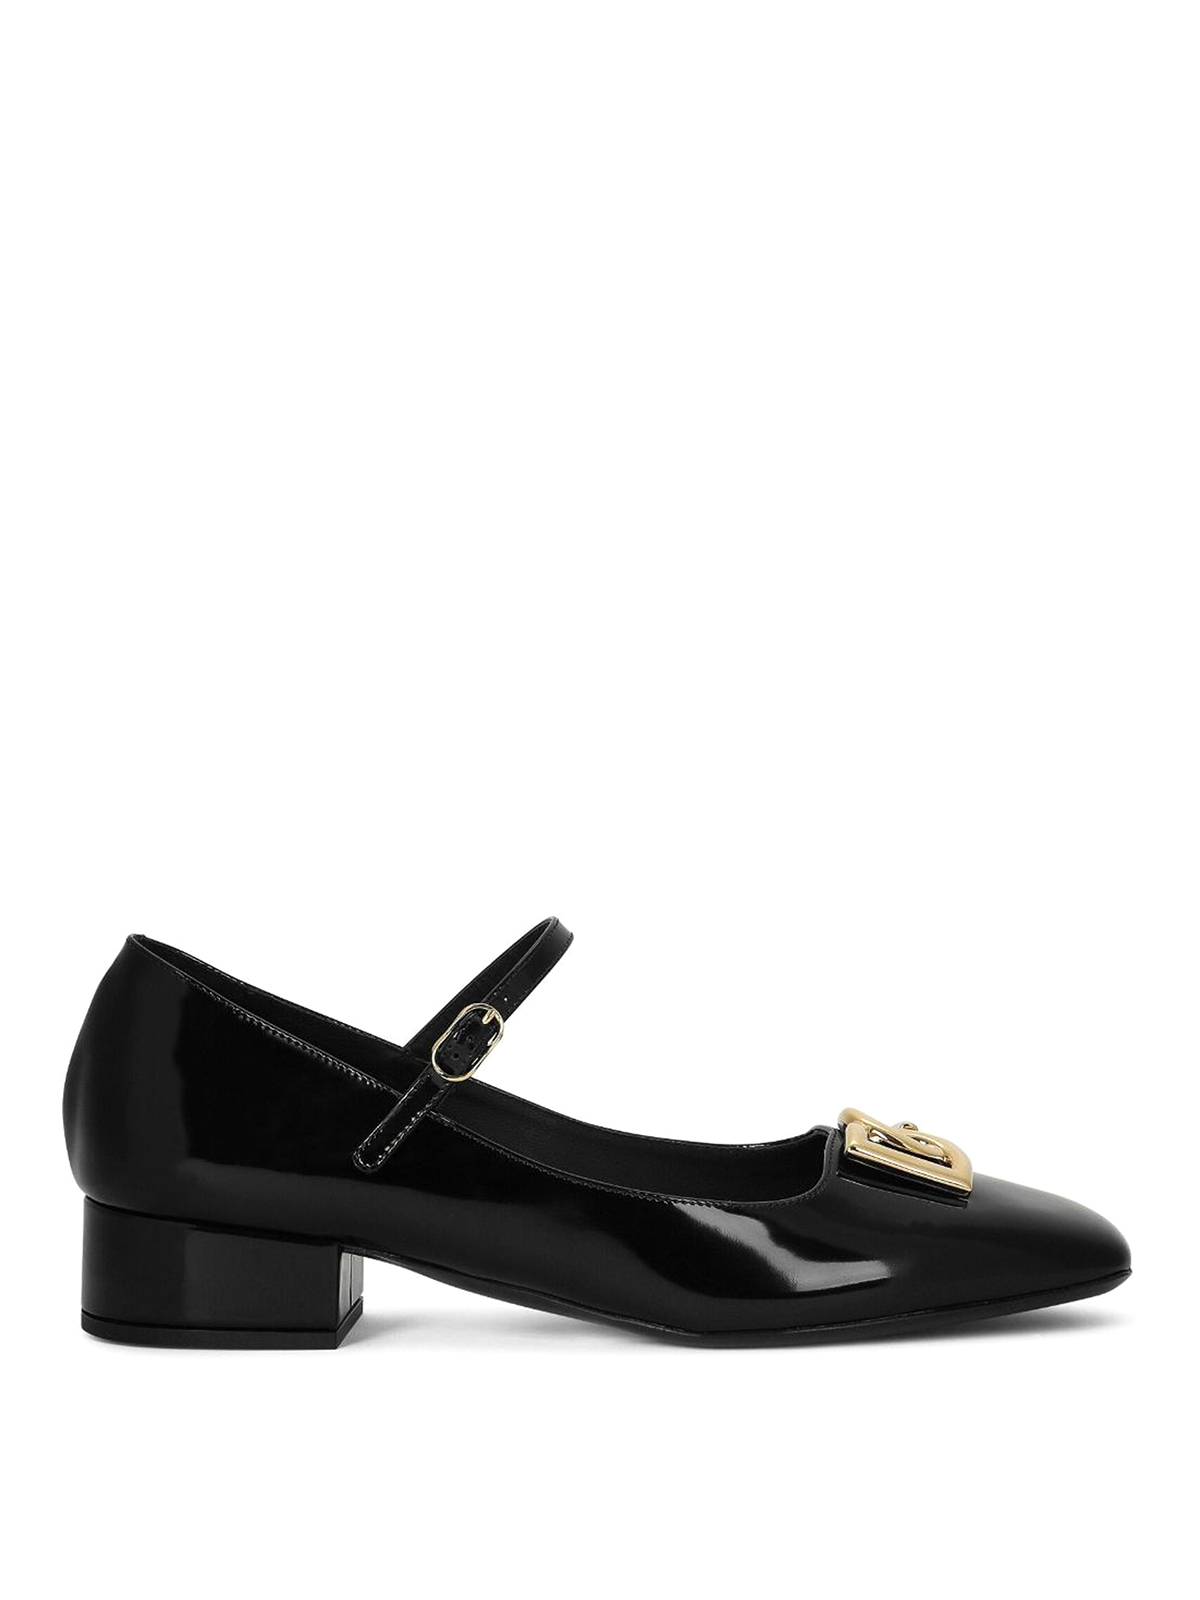 Dolce & Gabbana Mary Jane Flat Shoes In Black